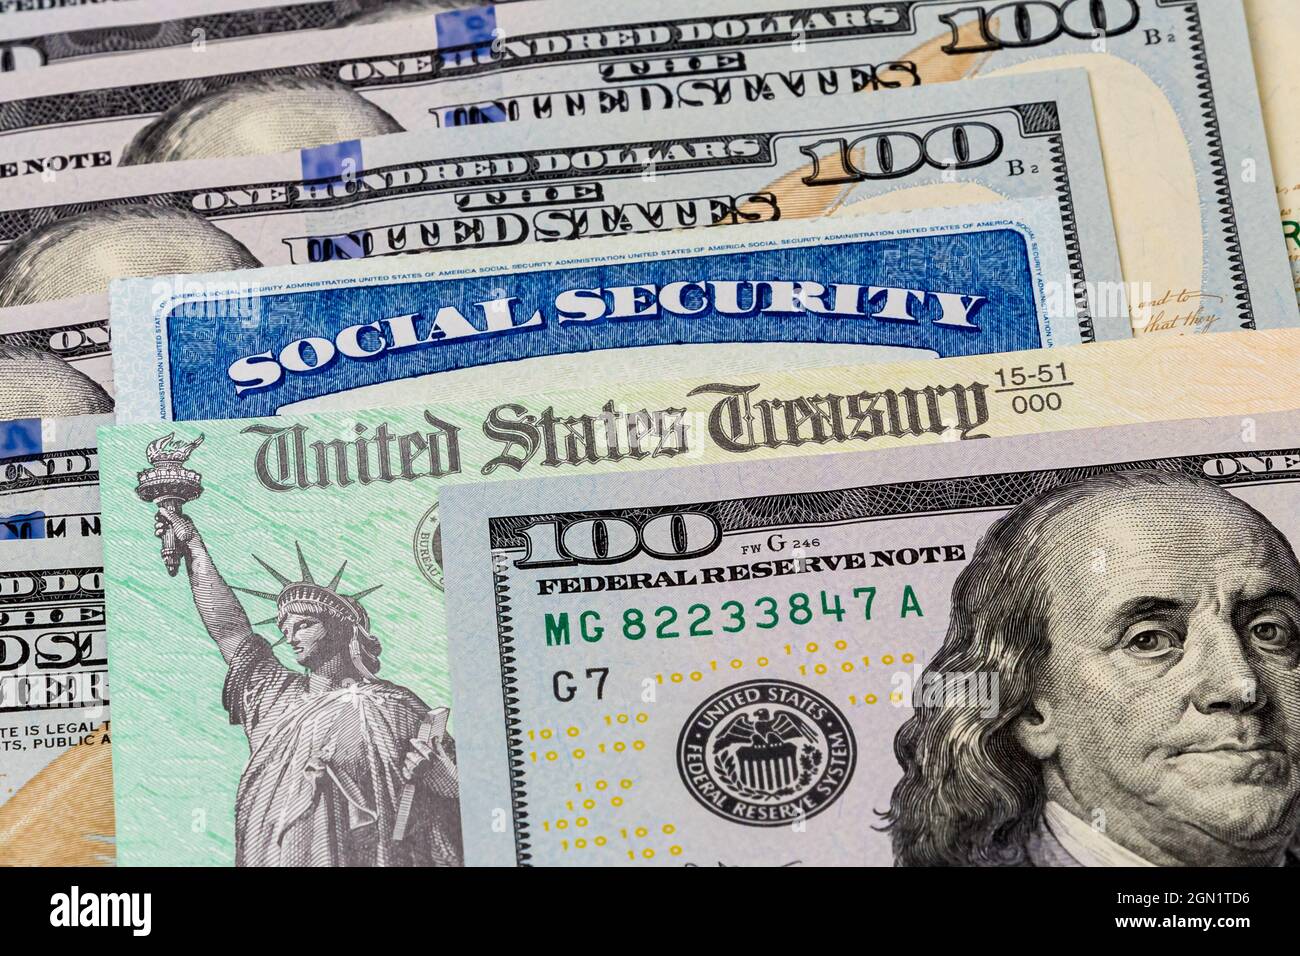 Social Security card, treasury check and 100 dollar bills. Concept of social security benefits payment, retirement and federal government benefits Stock Photo